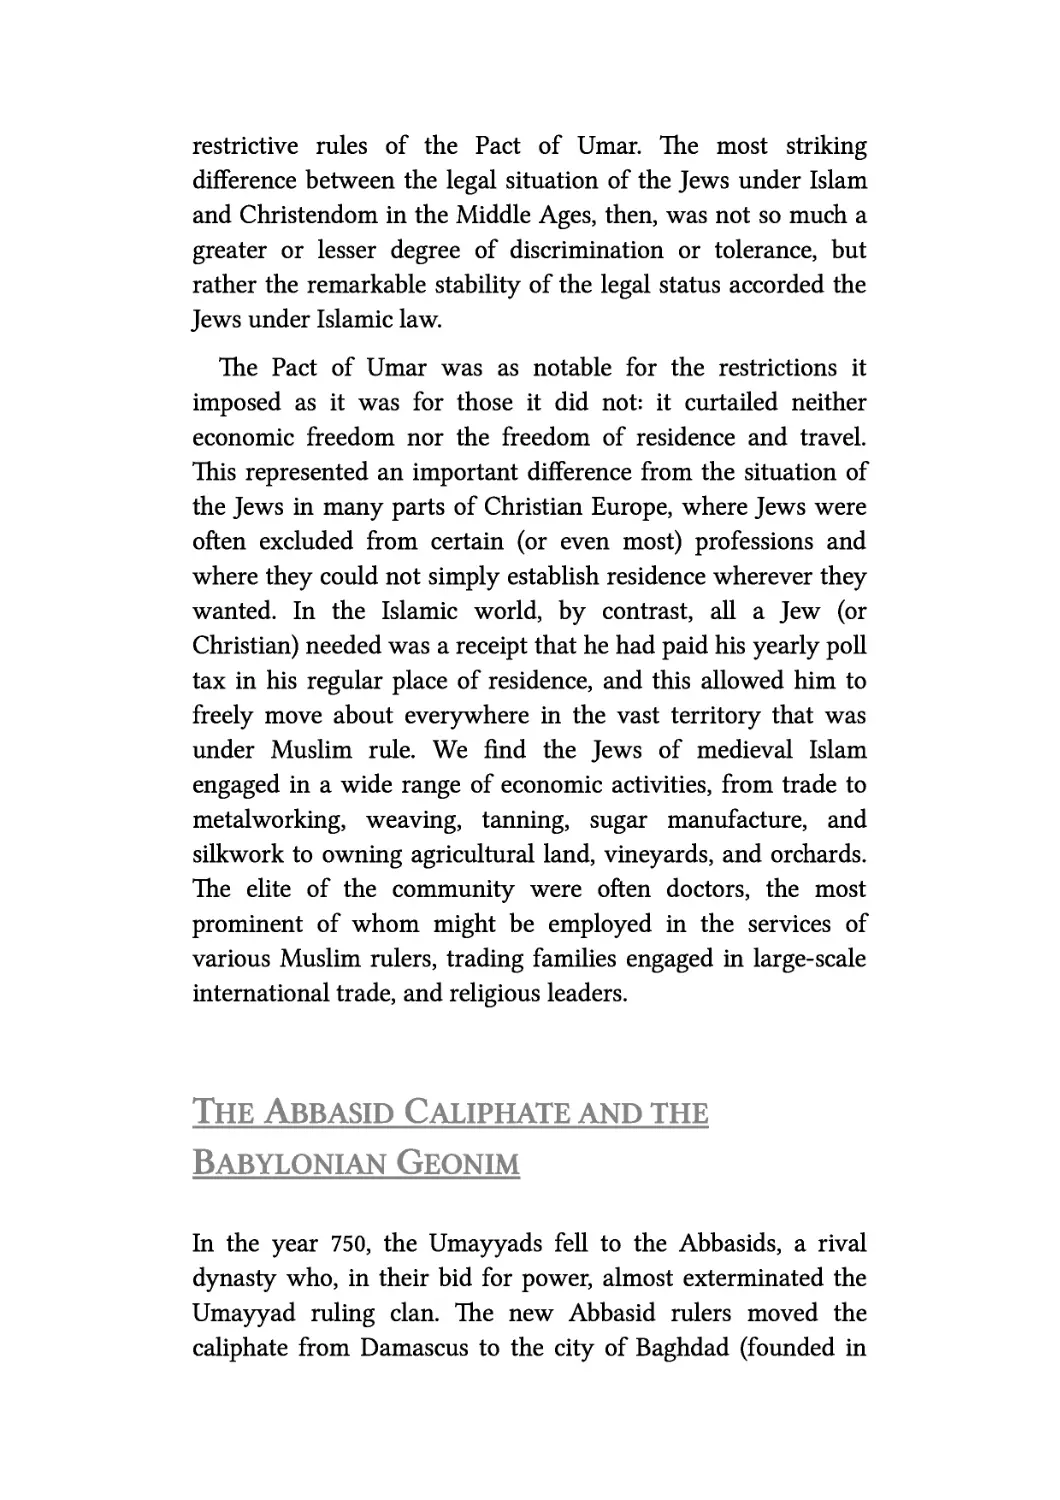 The Abbasid Caliphate and the Babylonian Geonim